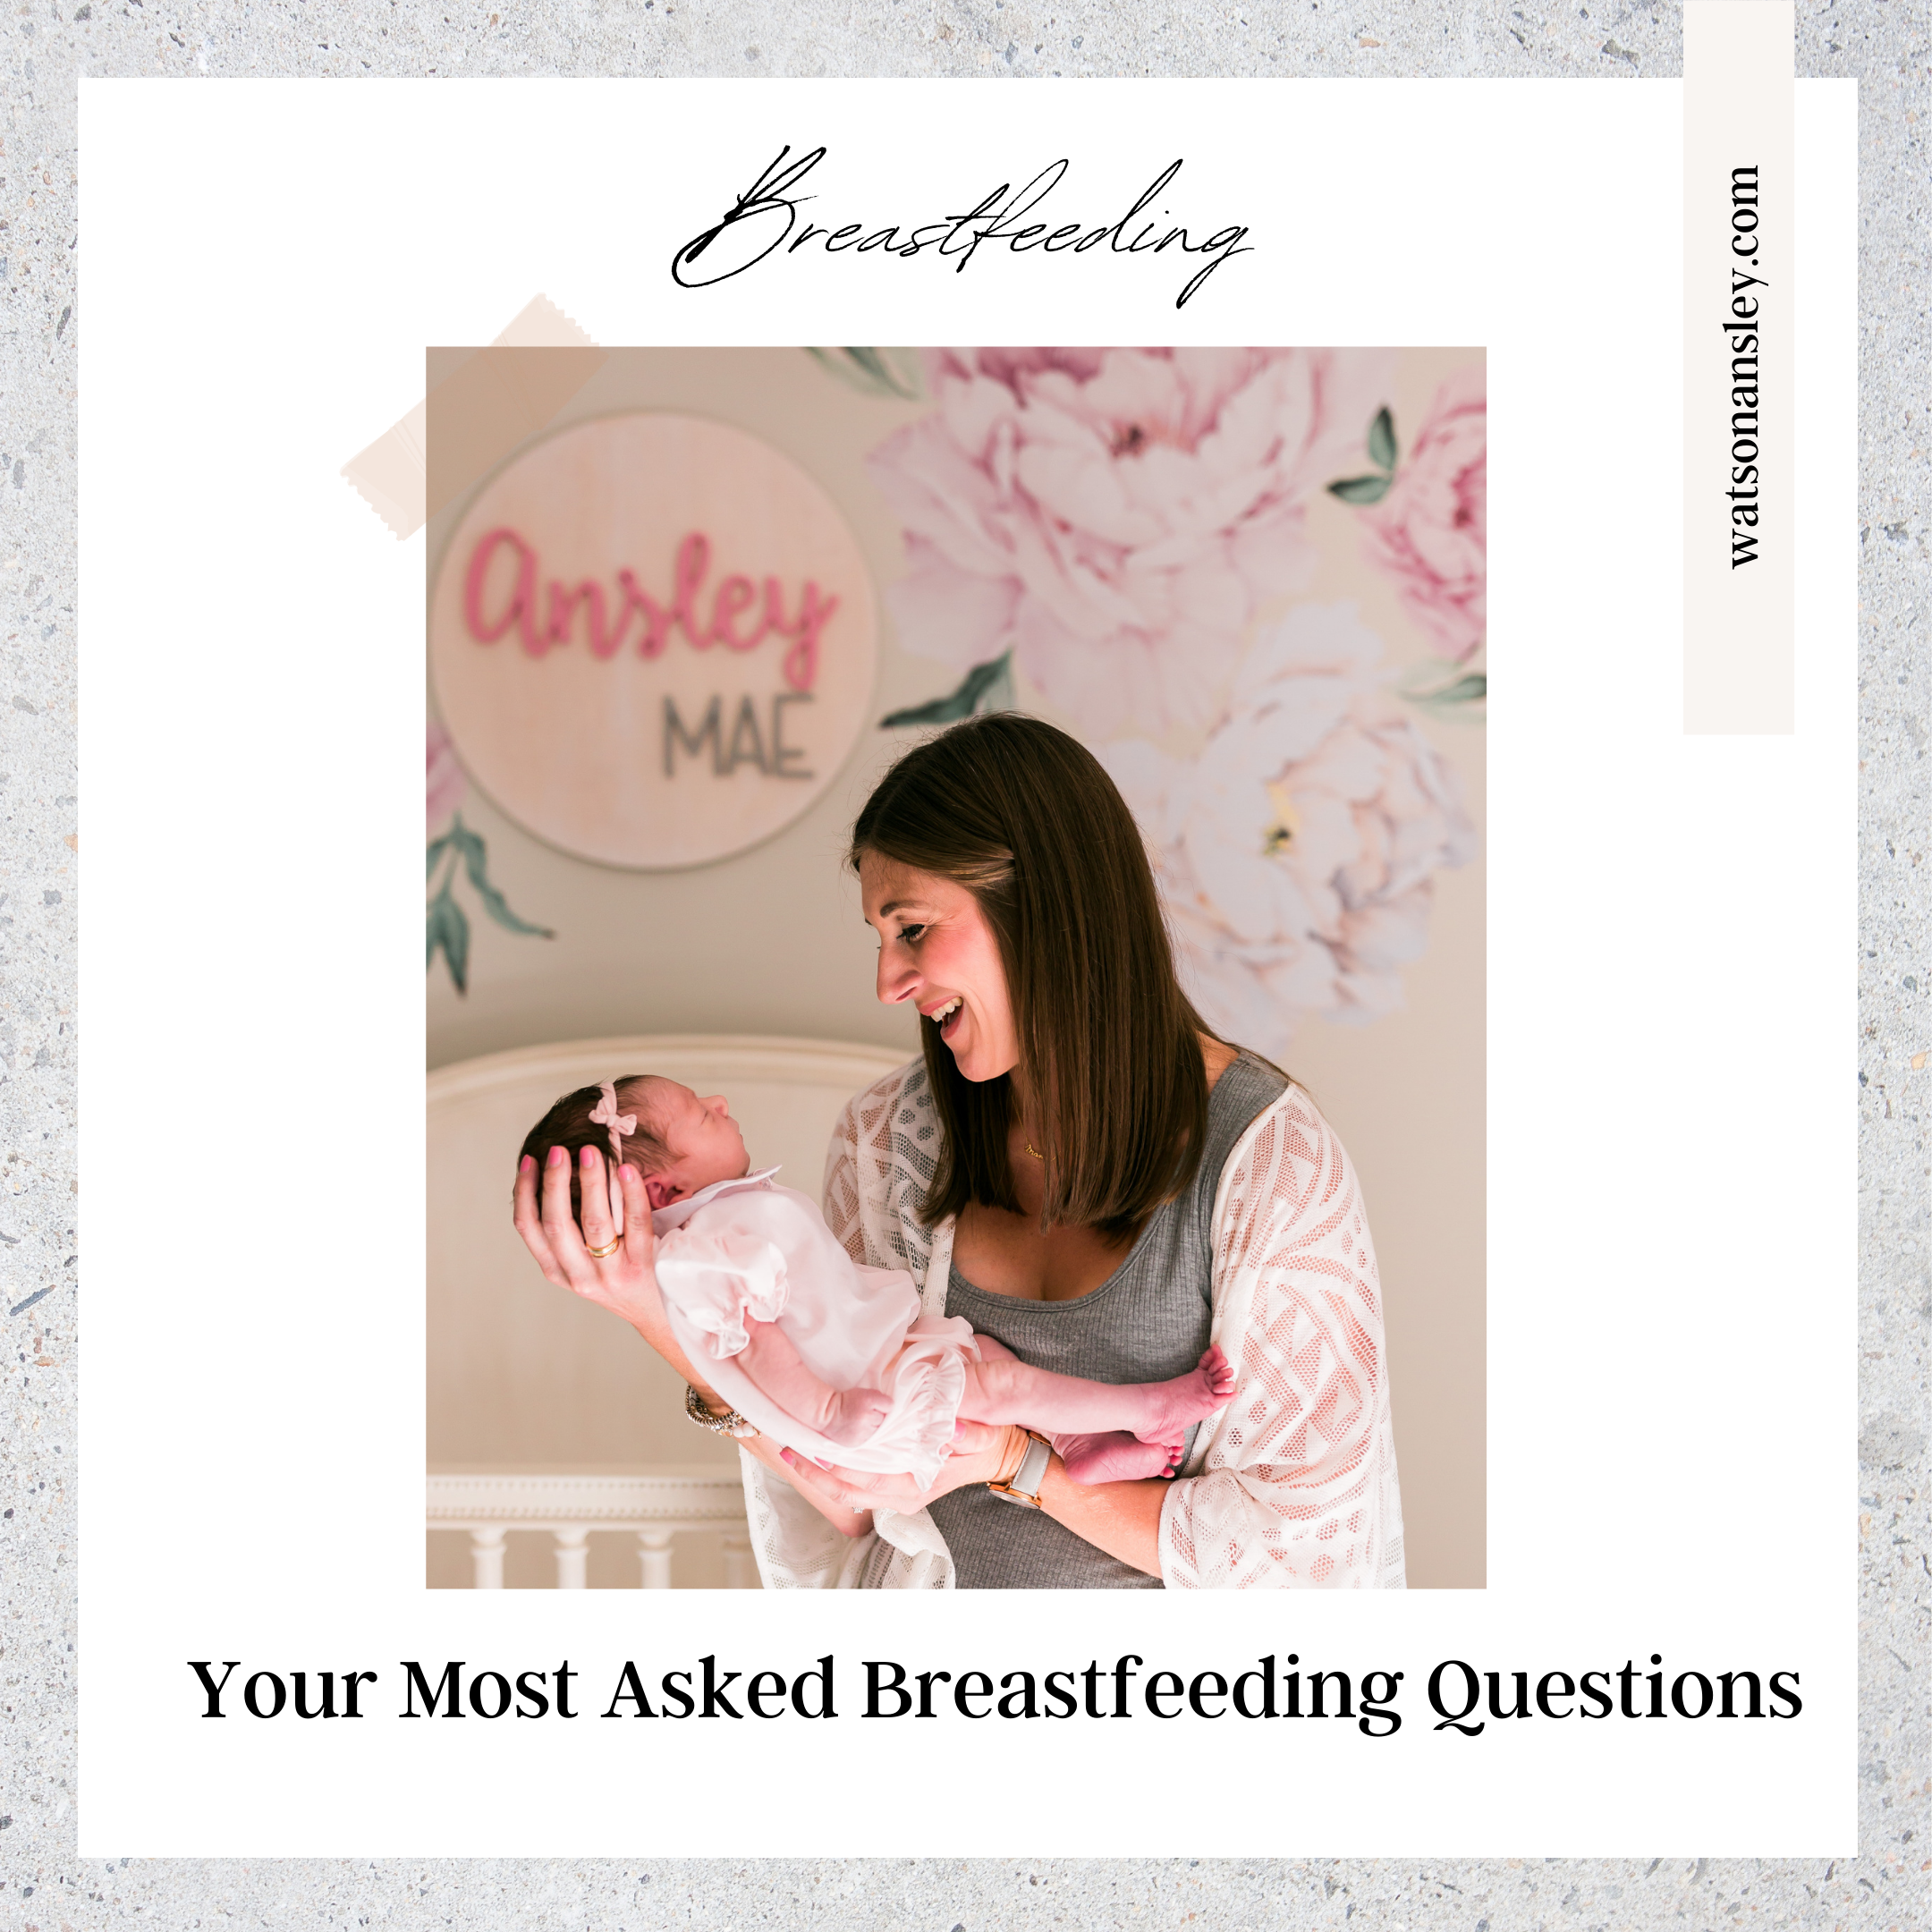 Your most asked Breastfeeding Questions